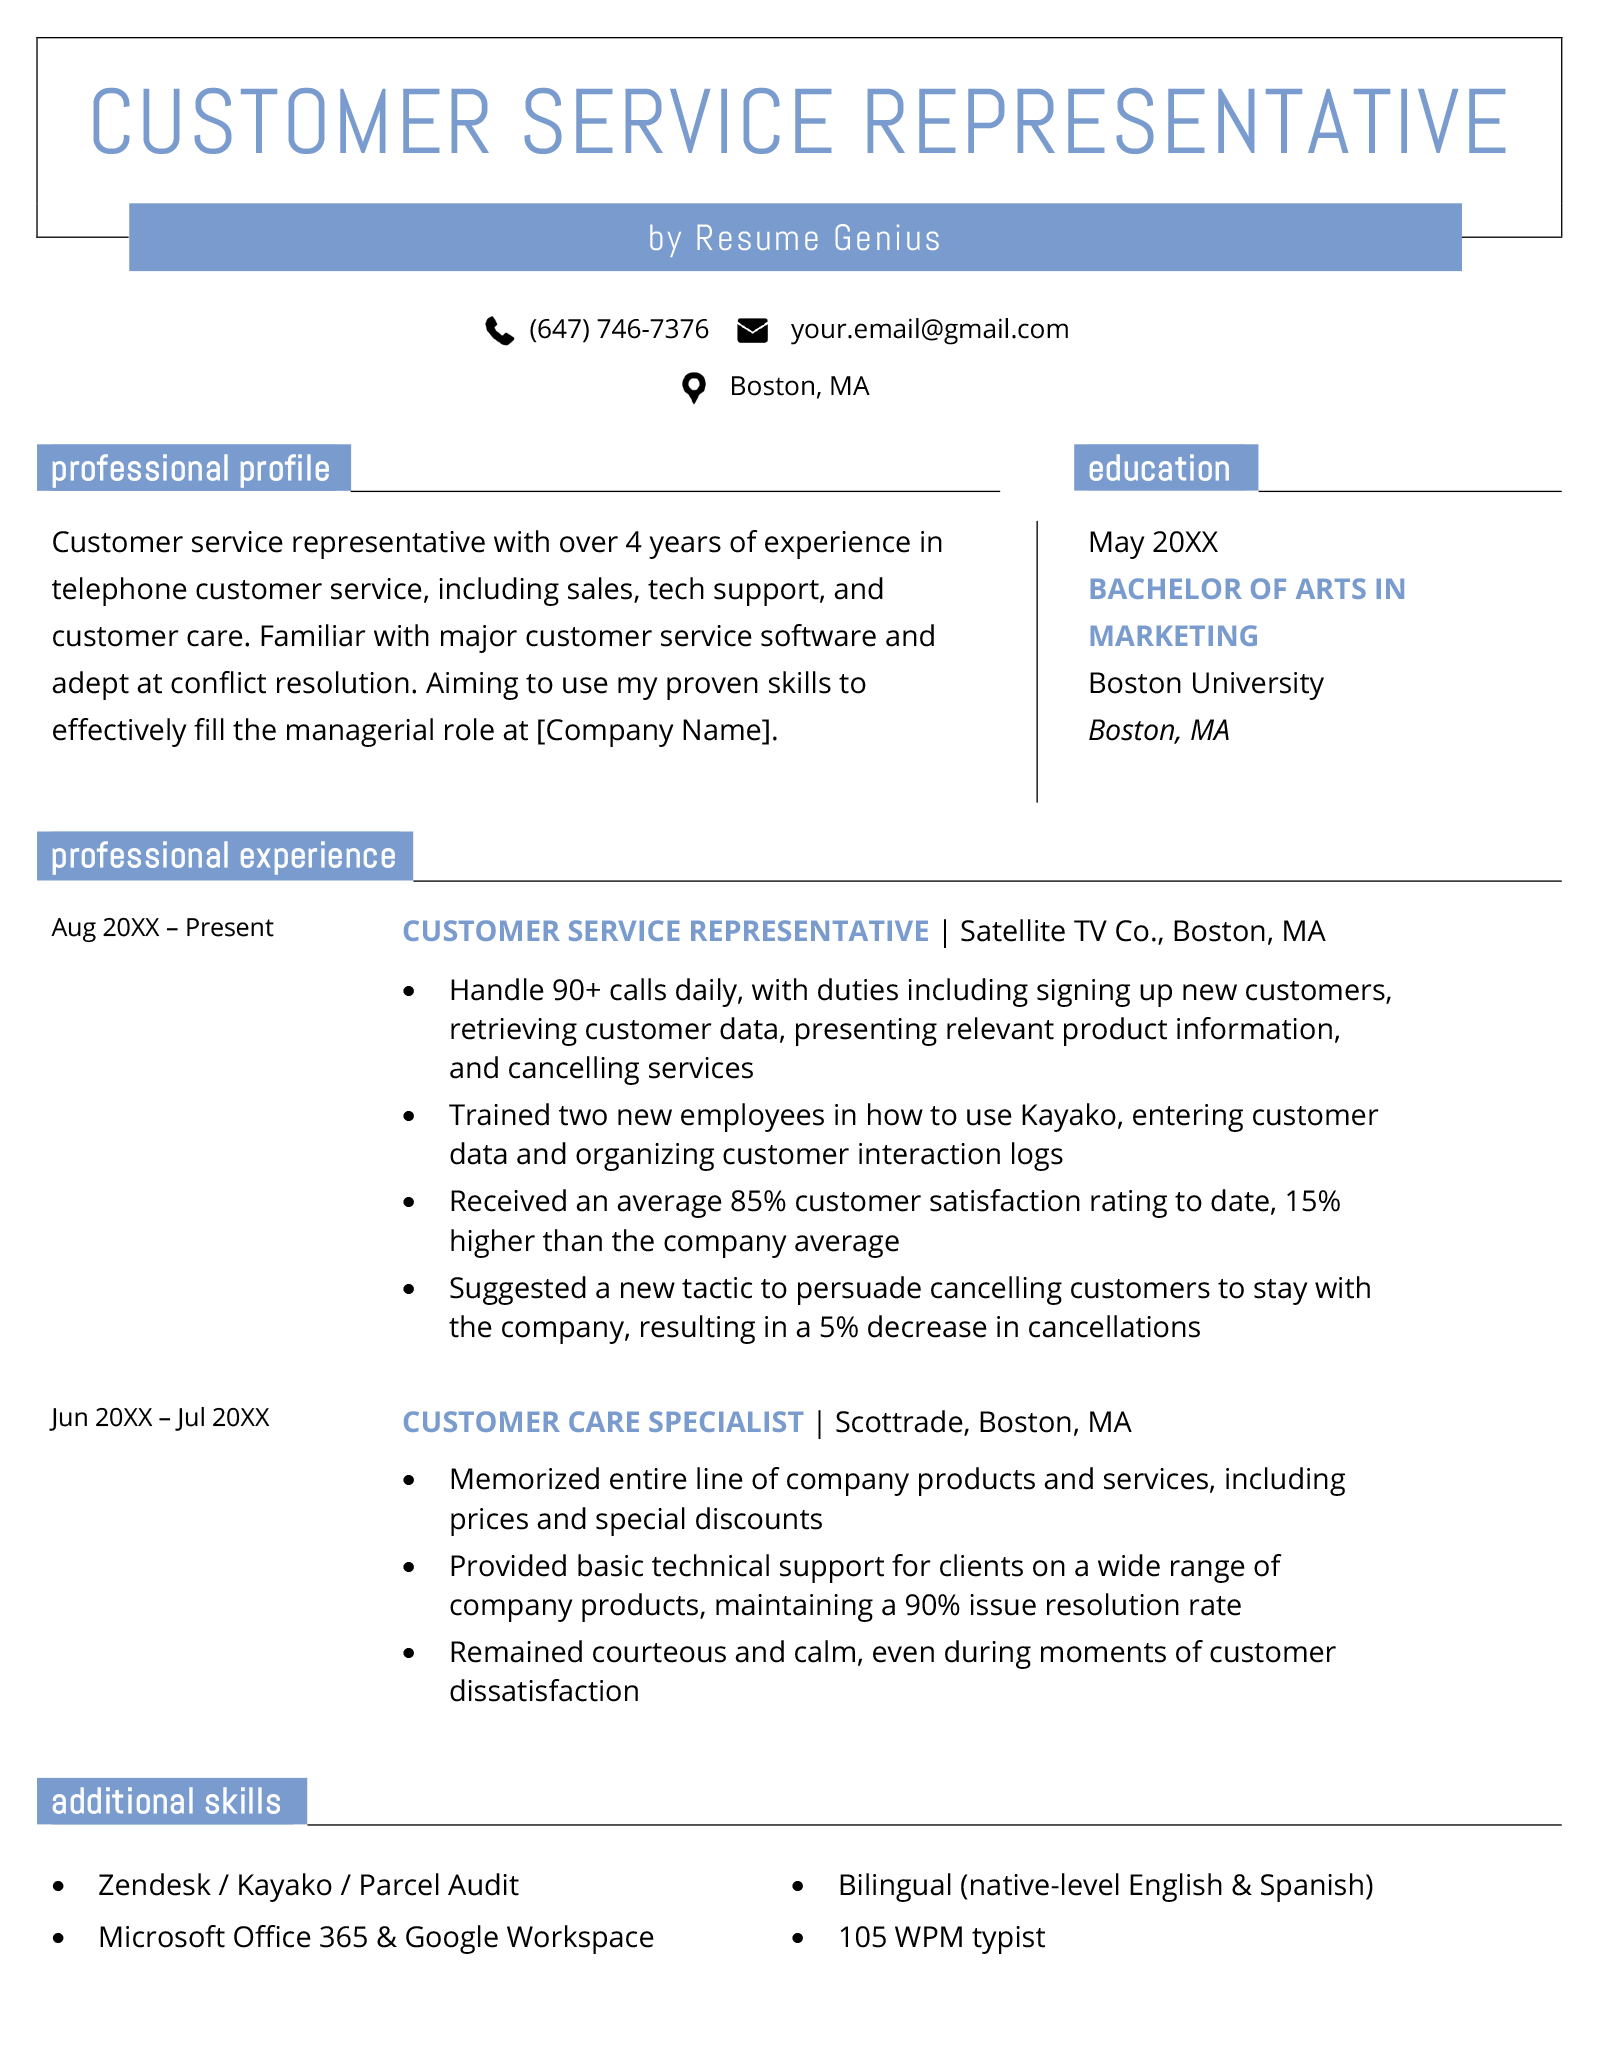 Customer service resume example that uses a more casual, blue resume design